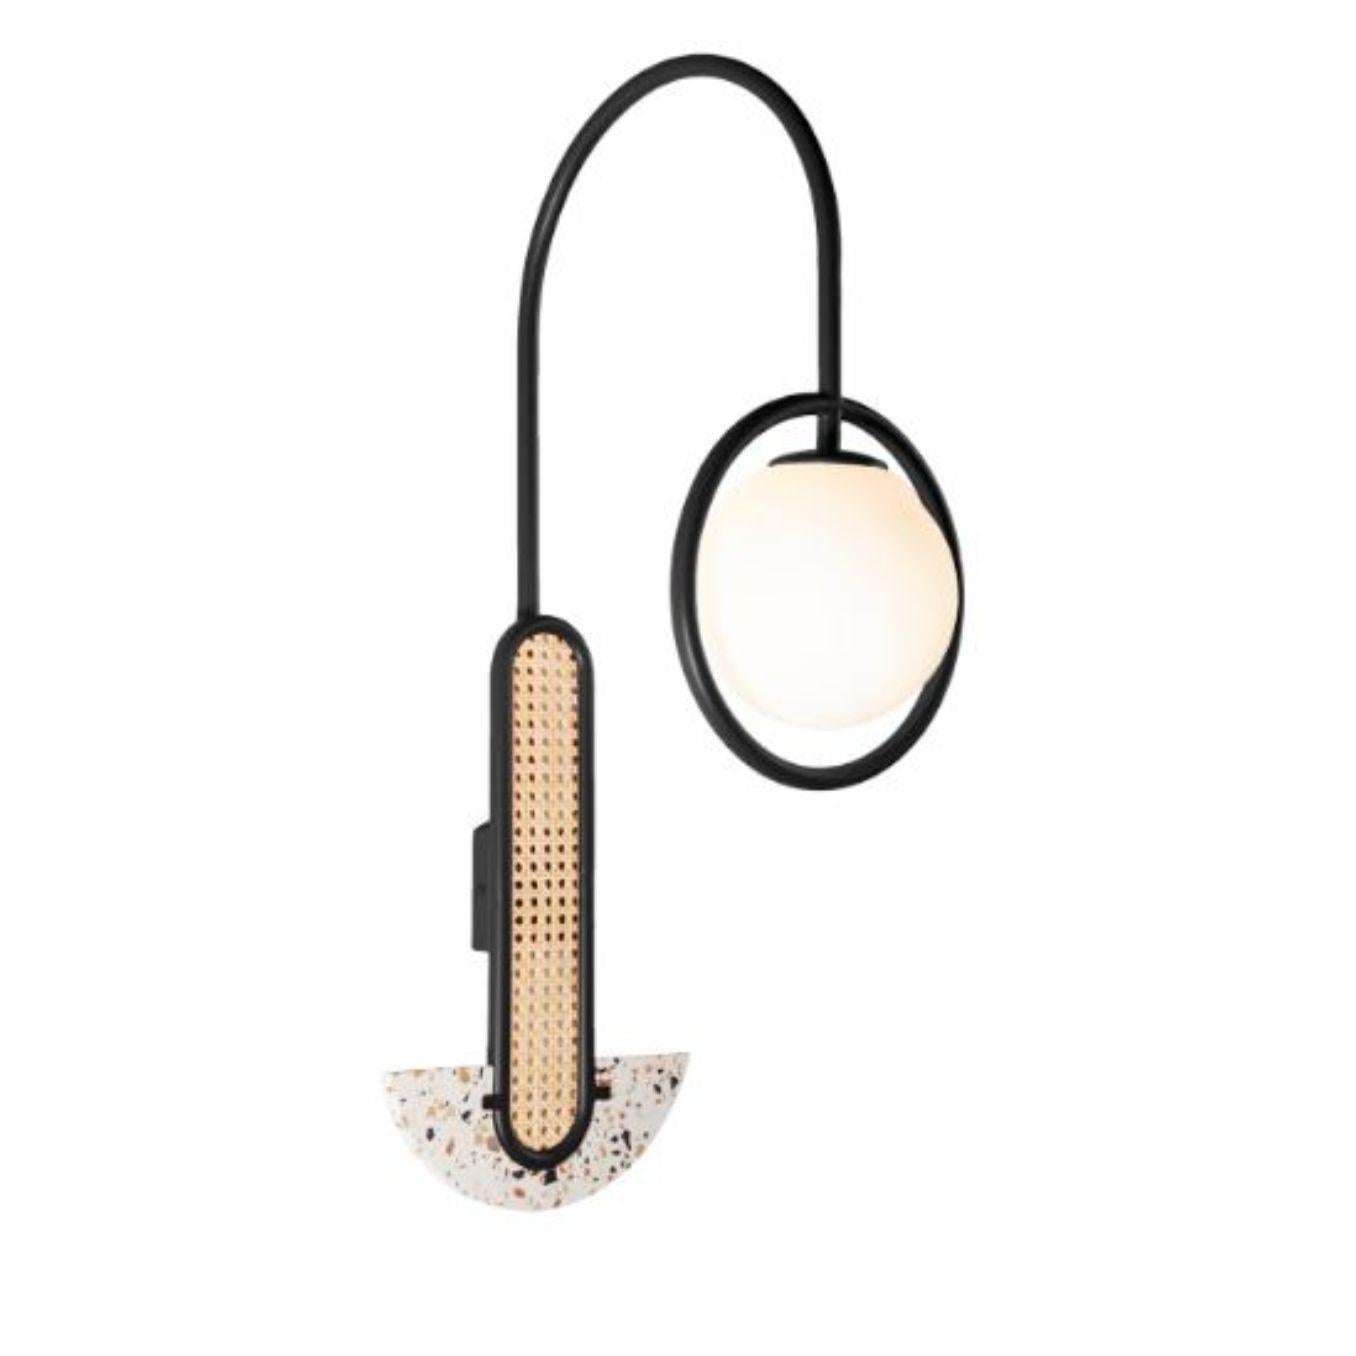 Black Frame wall lamp by Dooq
Dimensions: W 45 x D 28 x H 85.5 cm
Materials: lacquered metal, rattan, terrazzo.
Also available in different colors. 

Information:
230V/50Hz
1 x max. G9
4W LED

120V/60Hz
1 x max. G9
4W LED

All our lamps can be wired